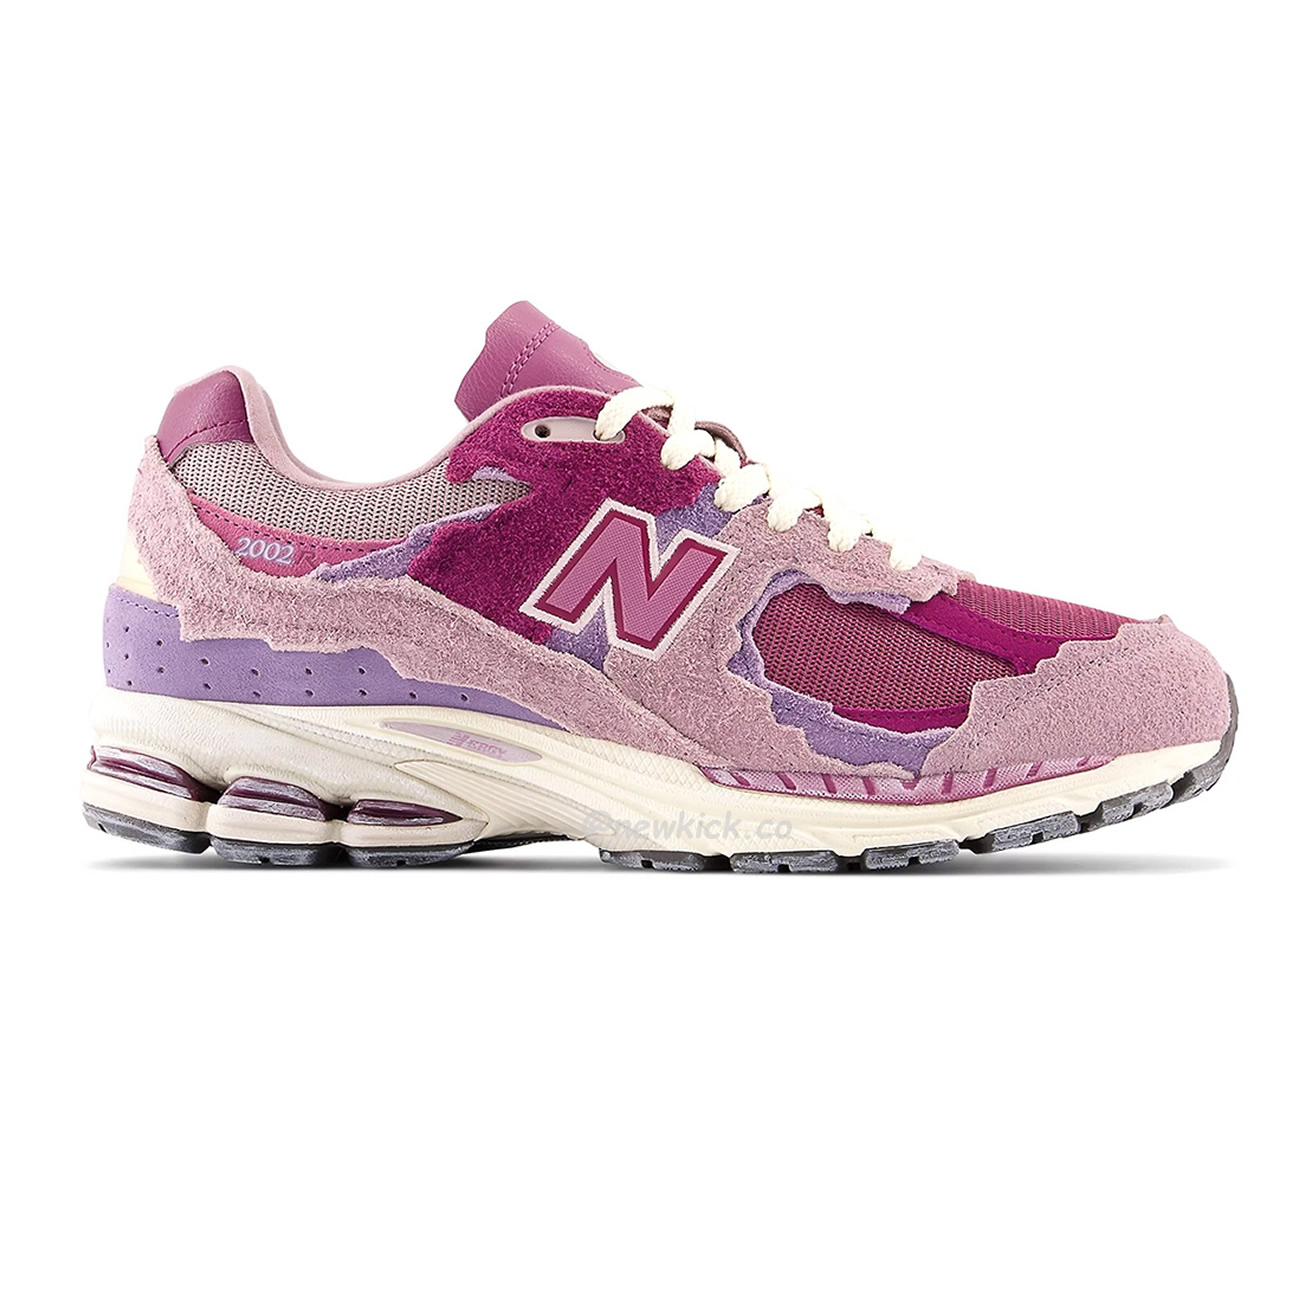 New Balance 2002r Protection Pack Pink M2002rdh (1) - newkick.org